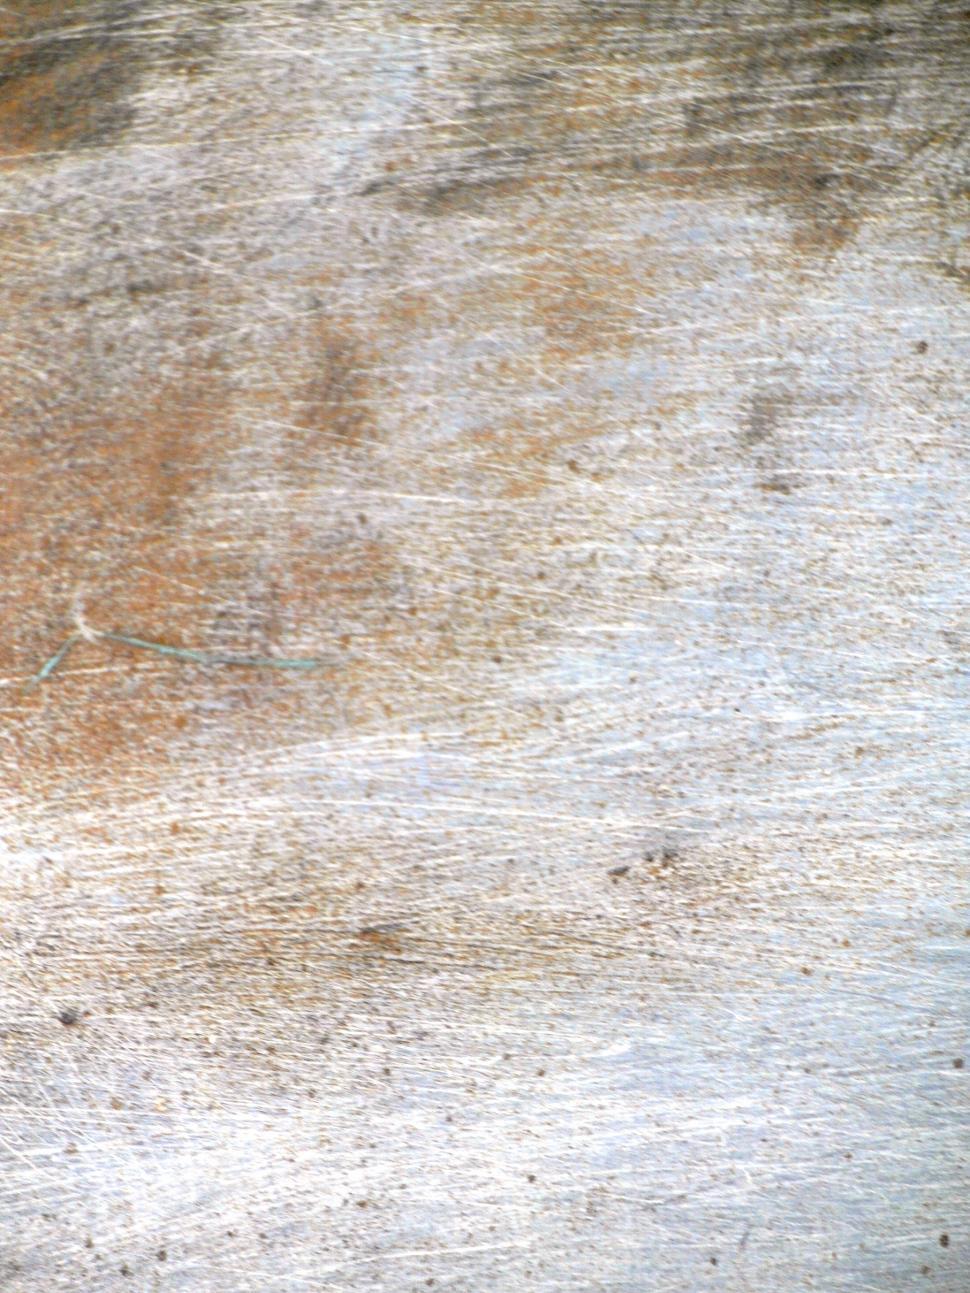 Free Image of Scratched Metal Background 